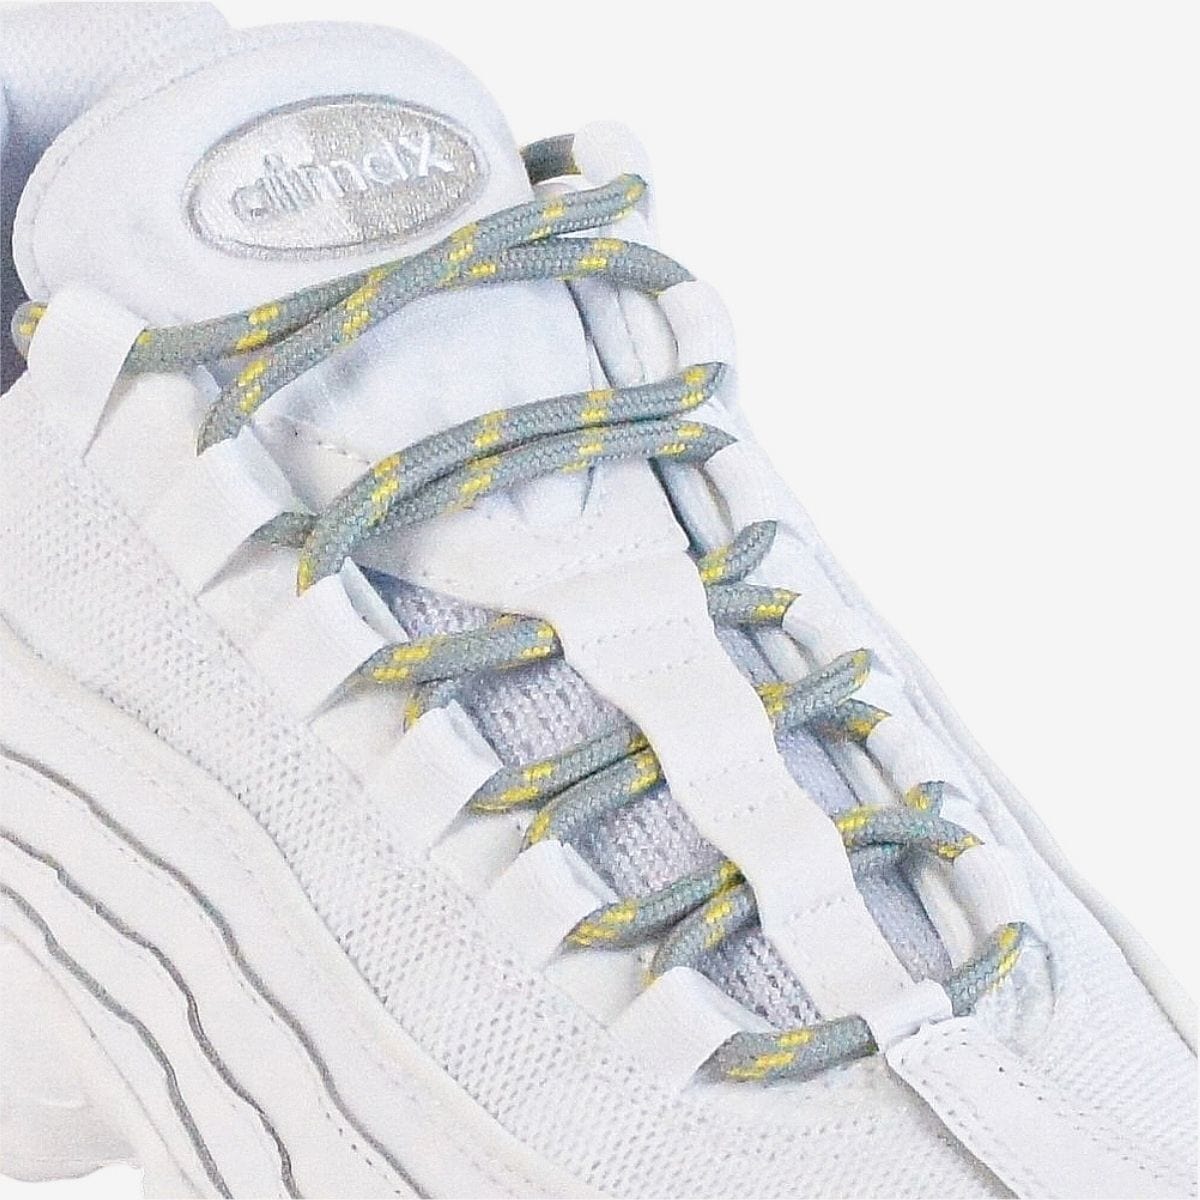 walking-shoe-laces-online-in-australia-colour-light-grey-and-yellow